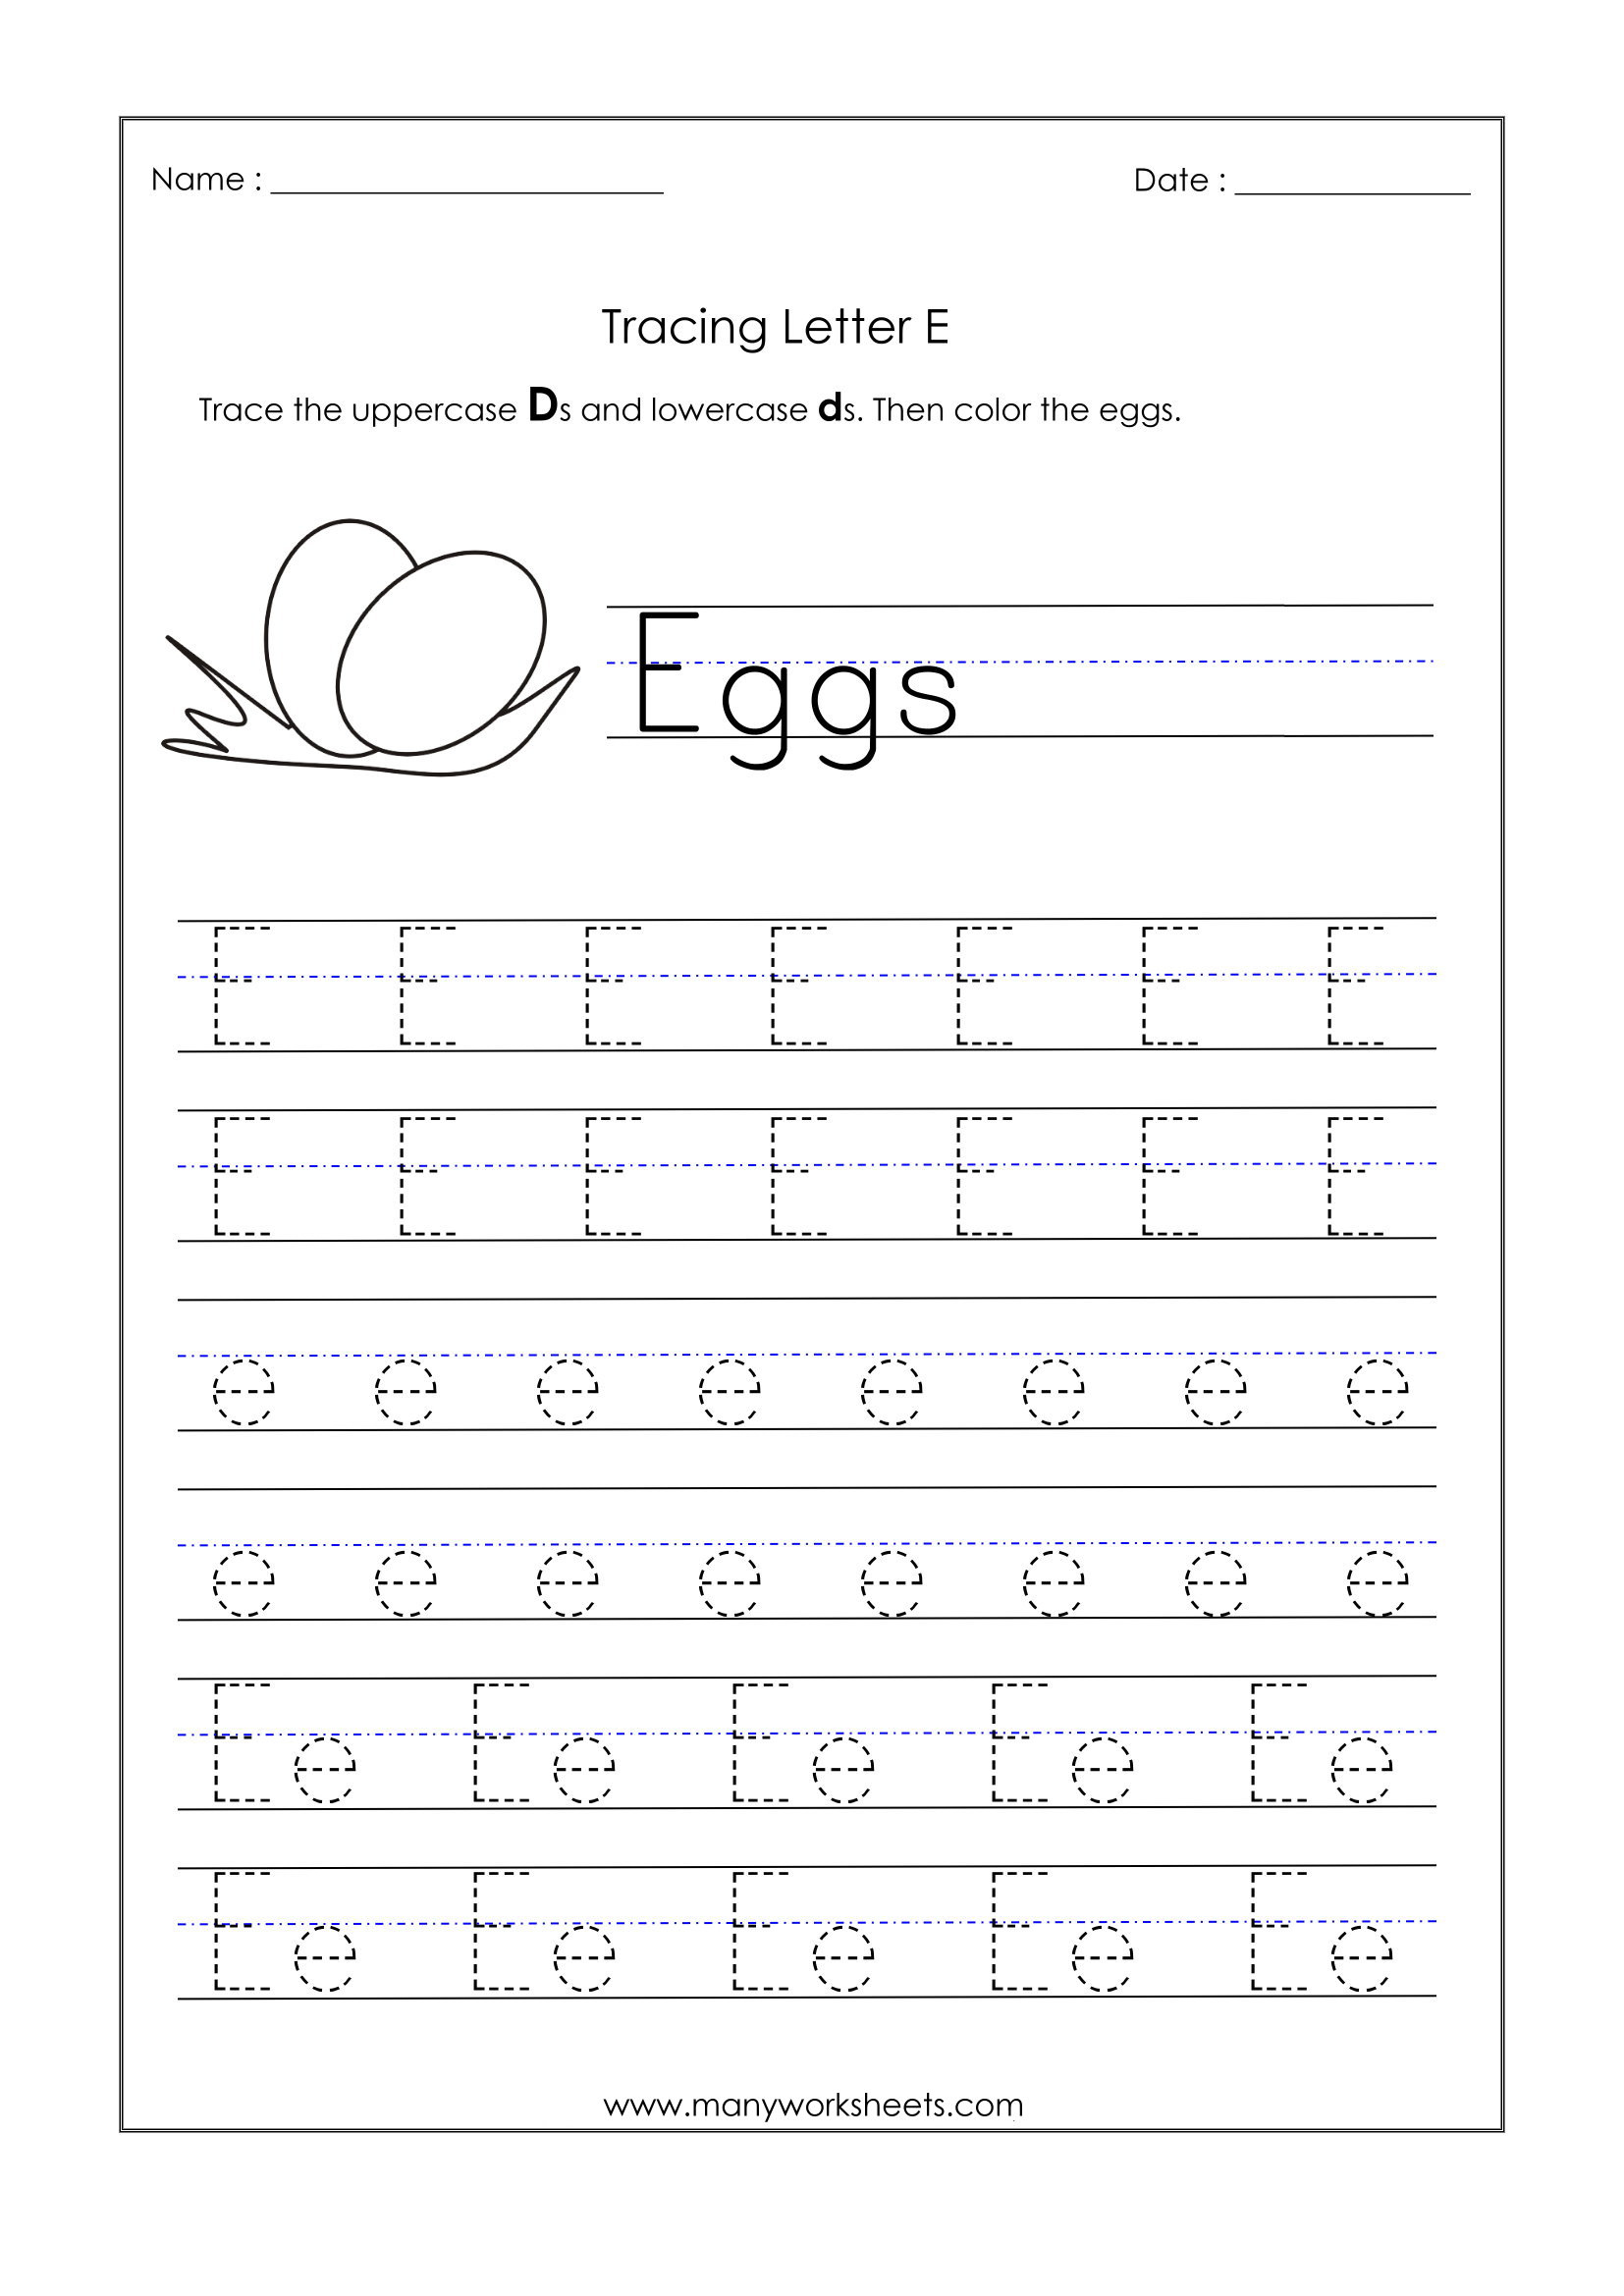 tracing-letter-e-preschool-letter-tracing-worksheets